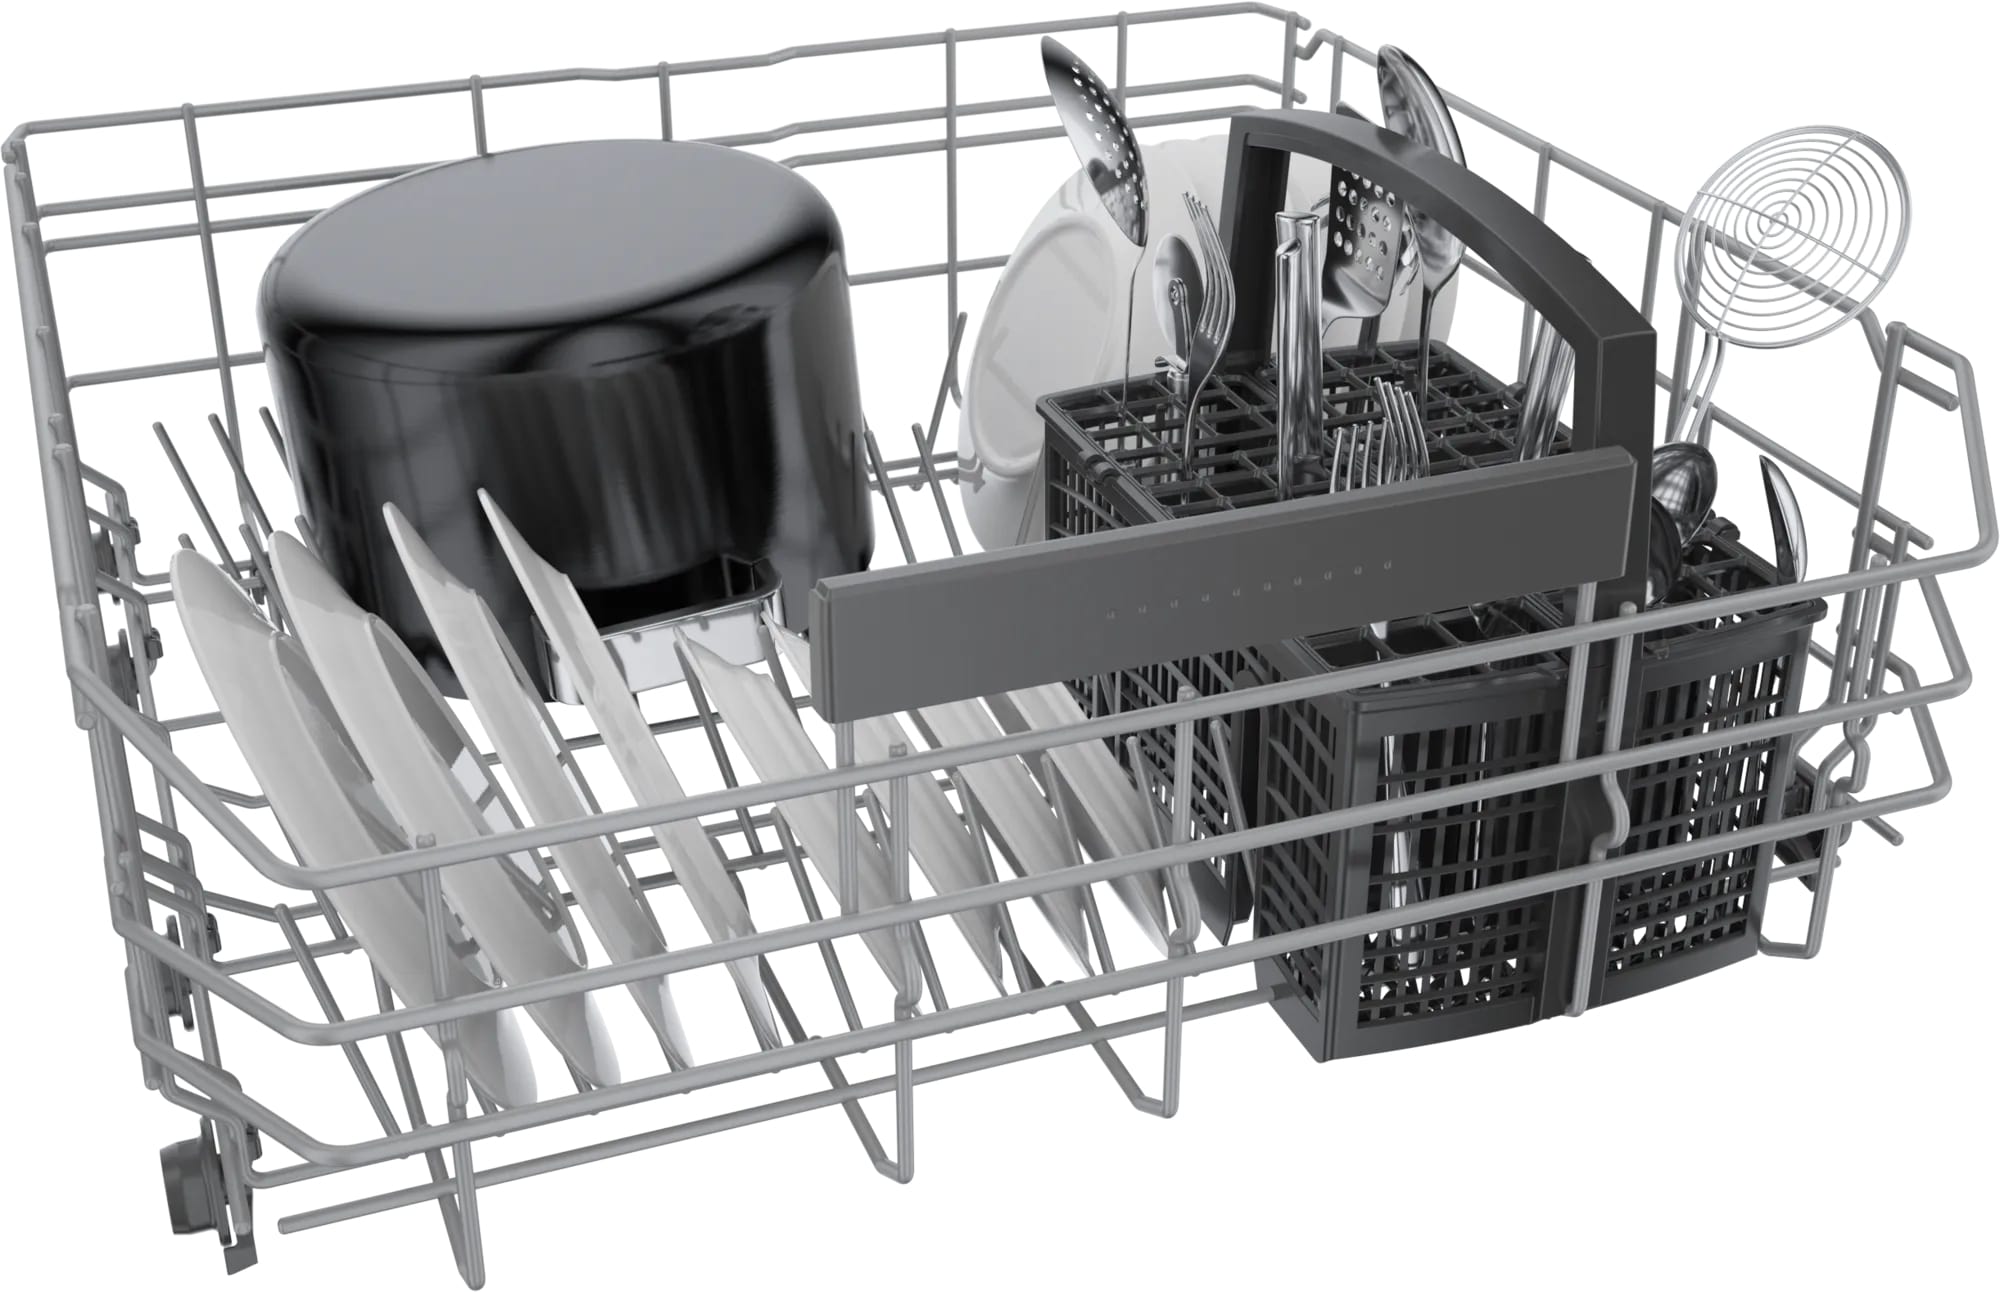 Bosch - 46 dBA Built In Dishwasher in Stainless - SHE53B75UC